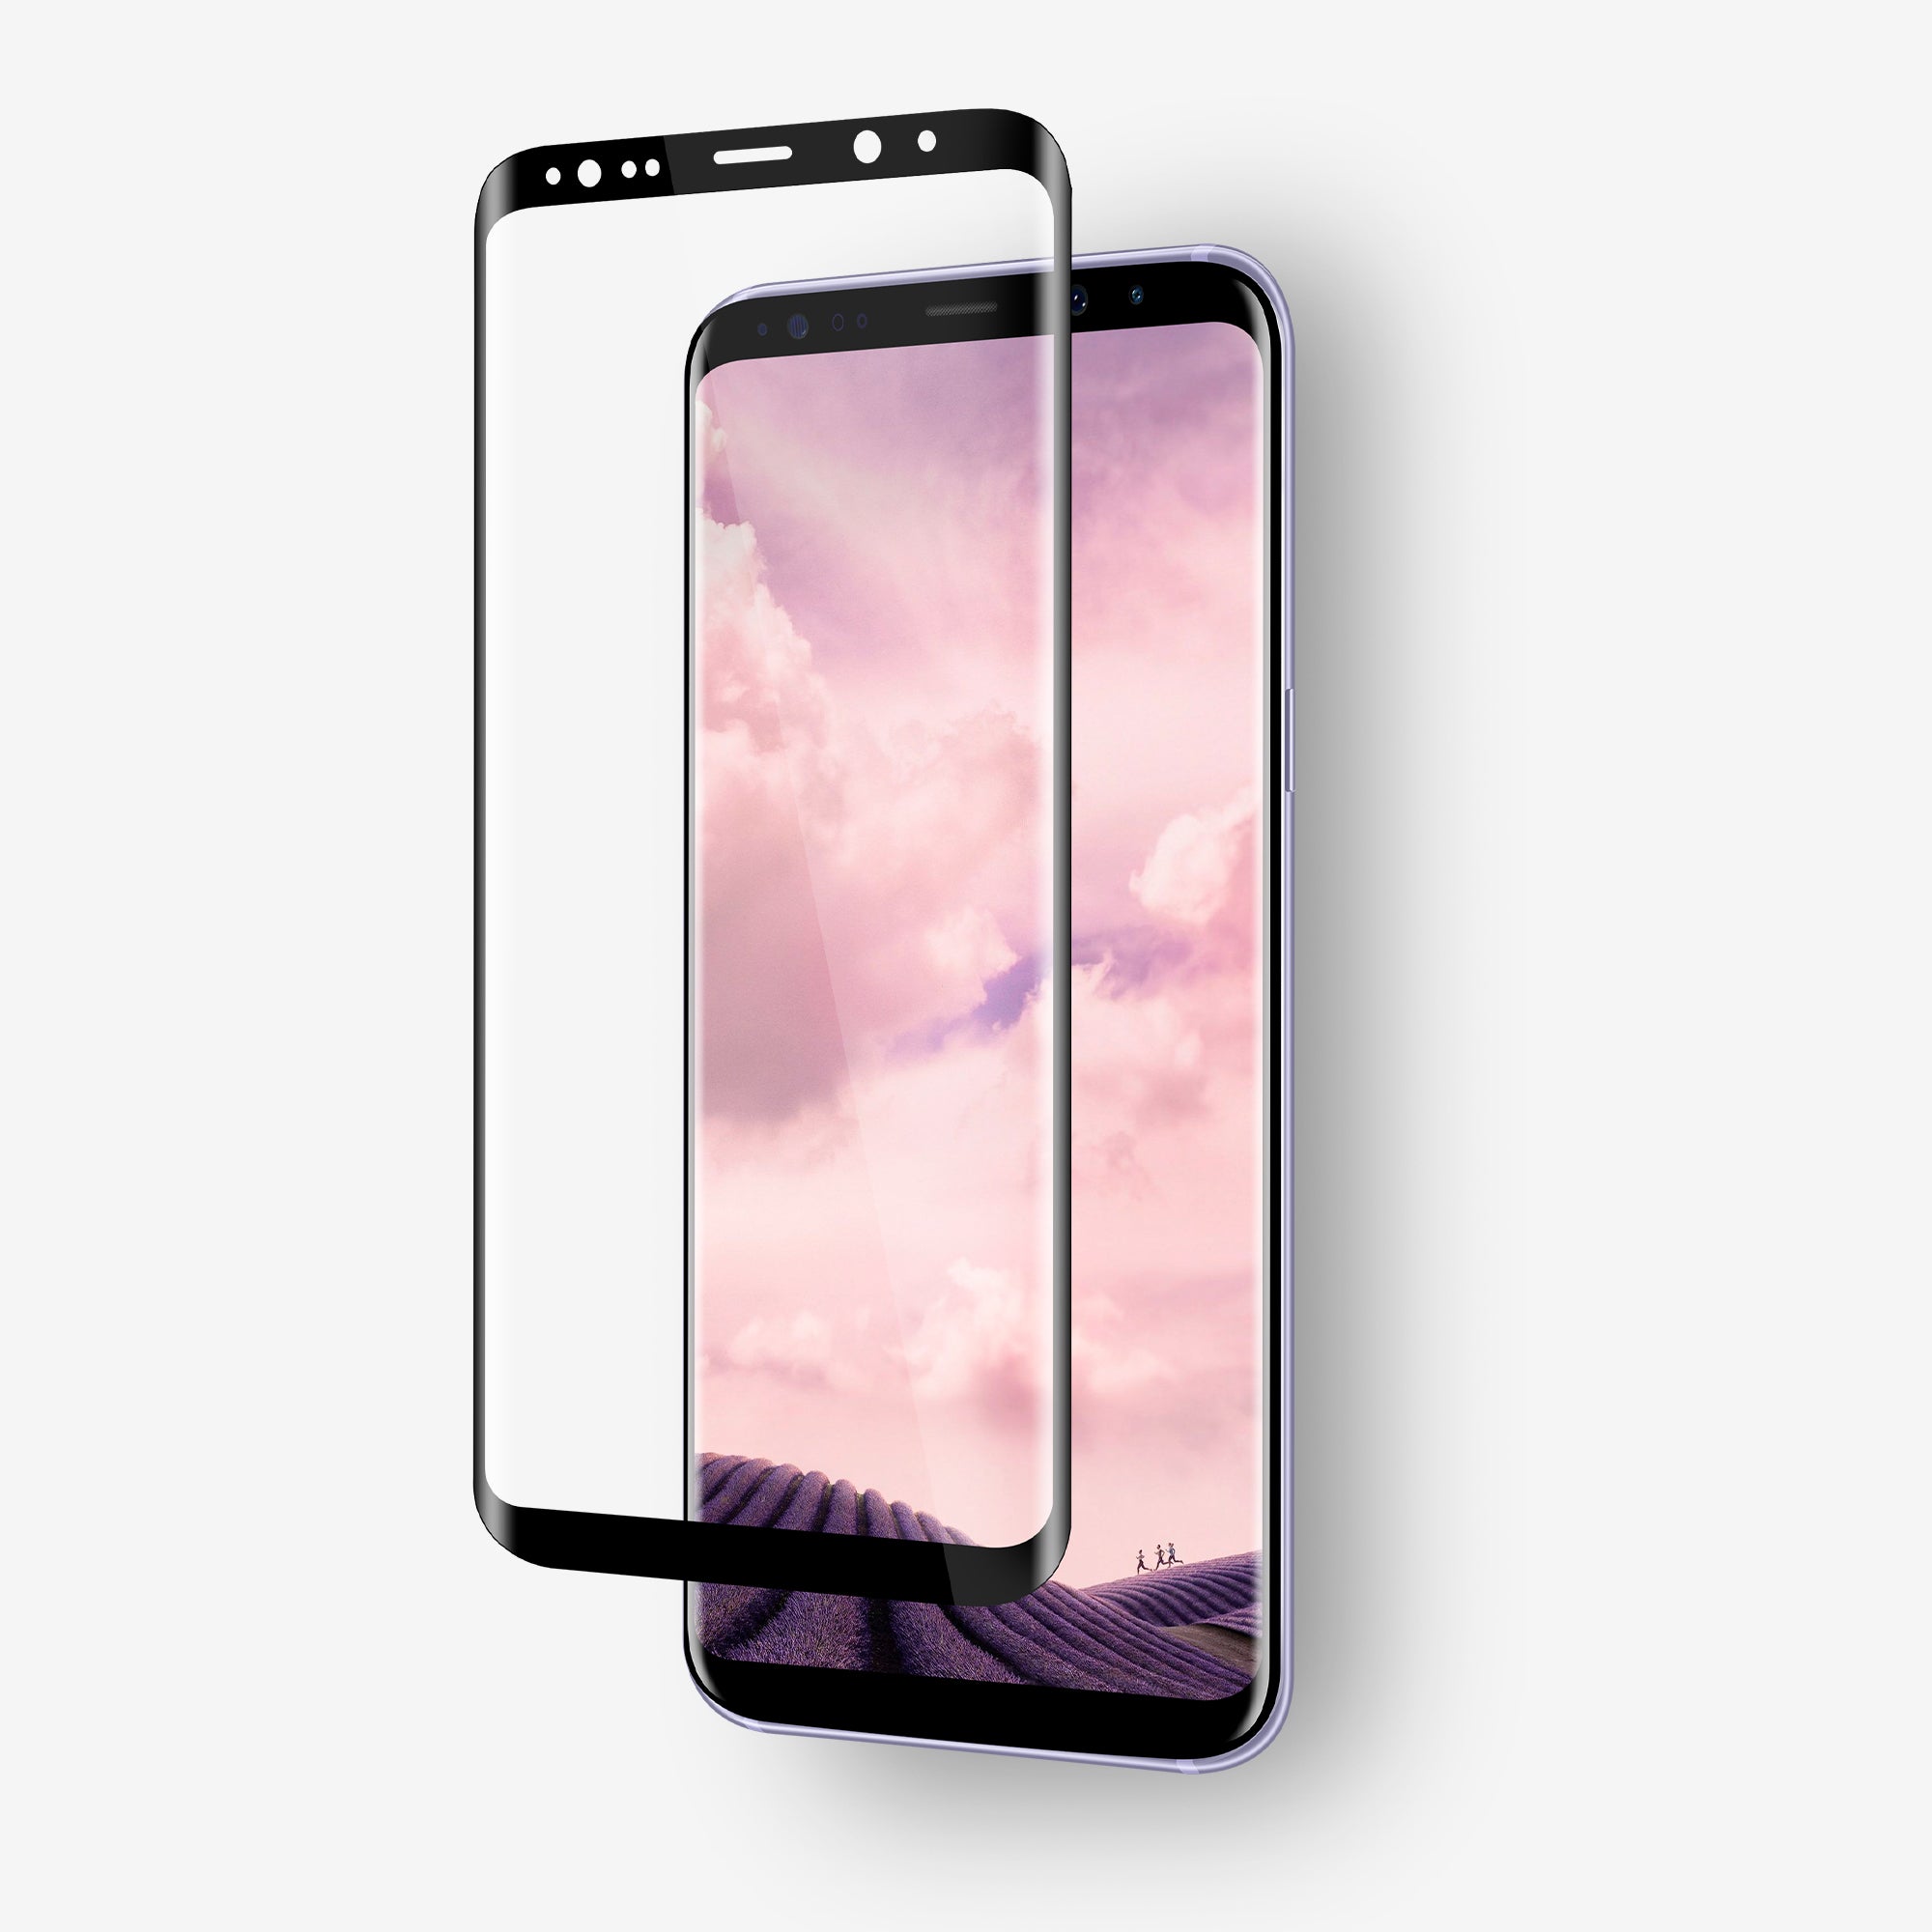 Screen Protector for S8 Plus | FLOLAB